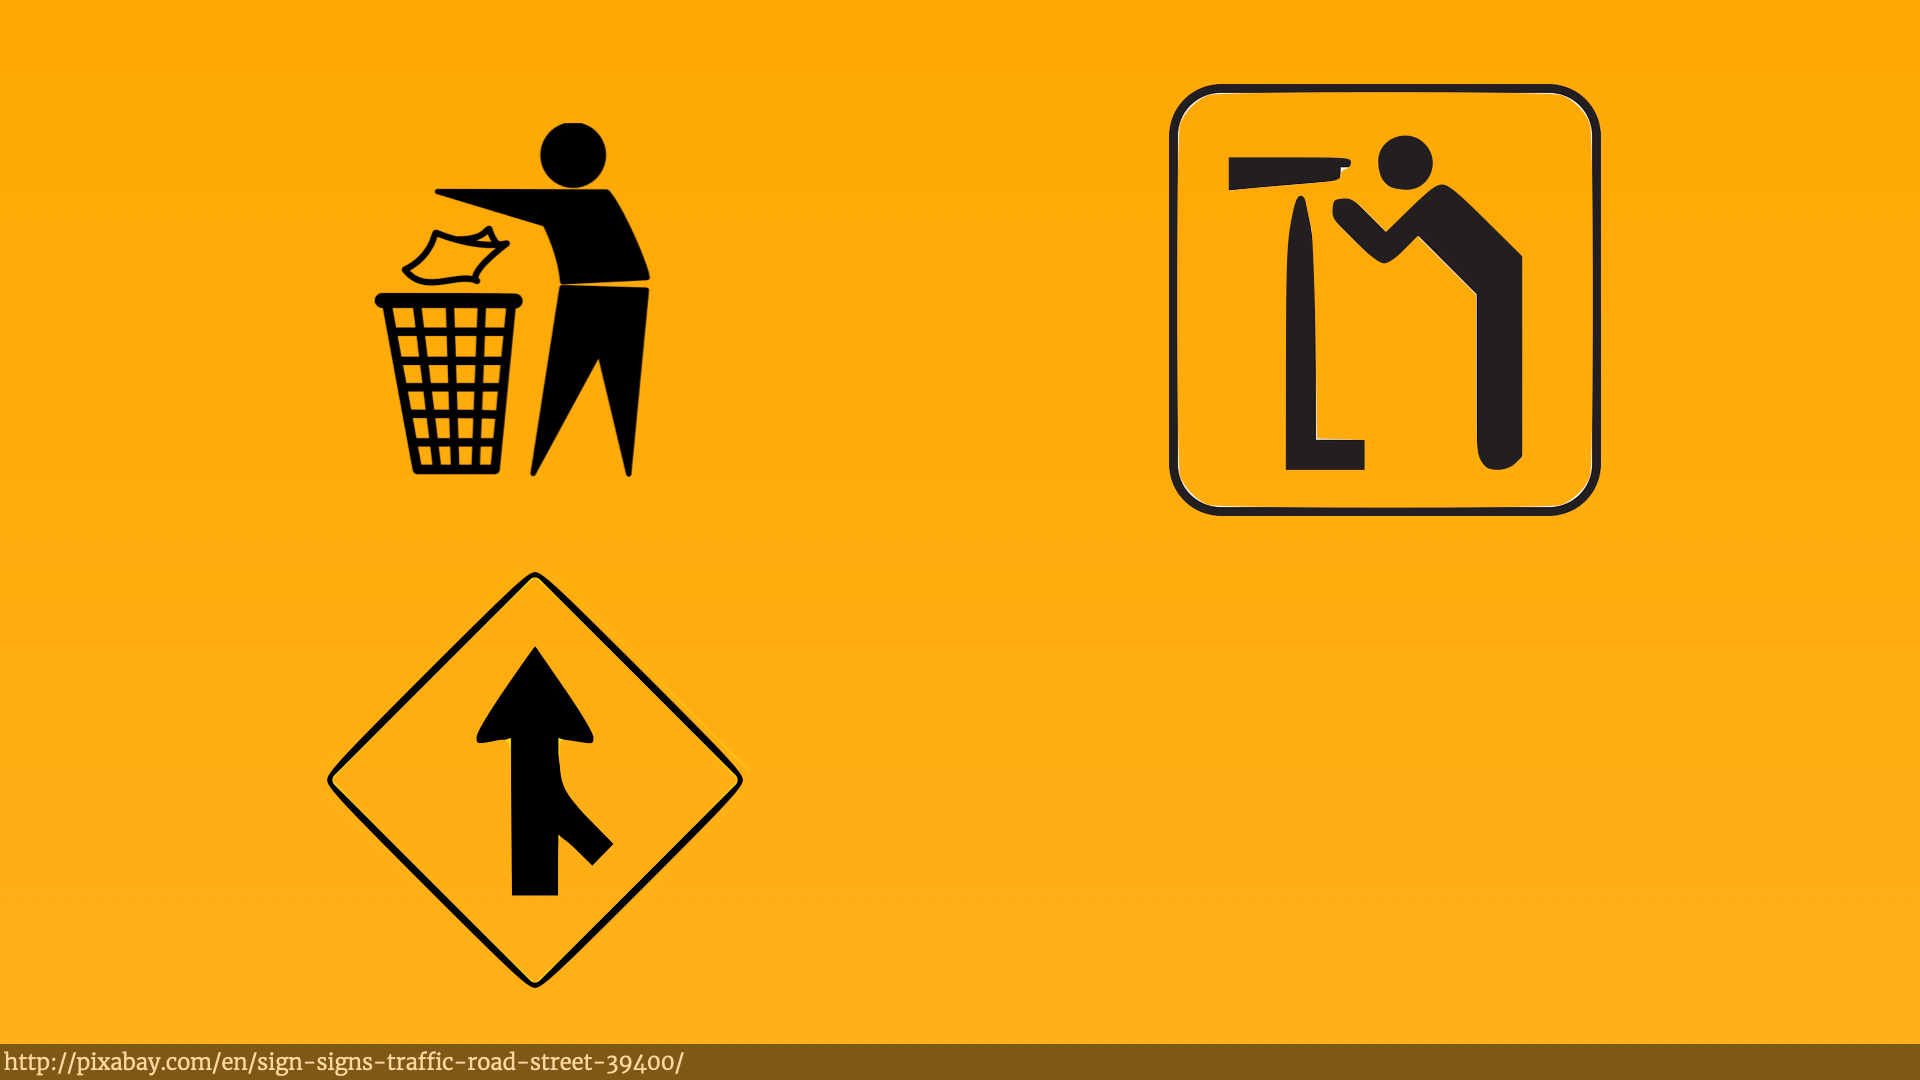 Three illustrations. Top-left somebody throwing something into a bin. Top-right somebody looking through a telescope. Bottom a sign for merging lanes.